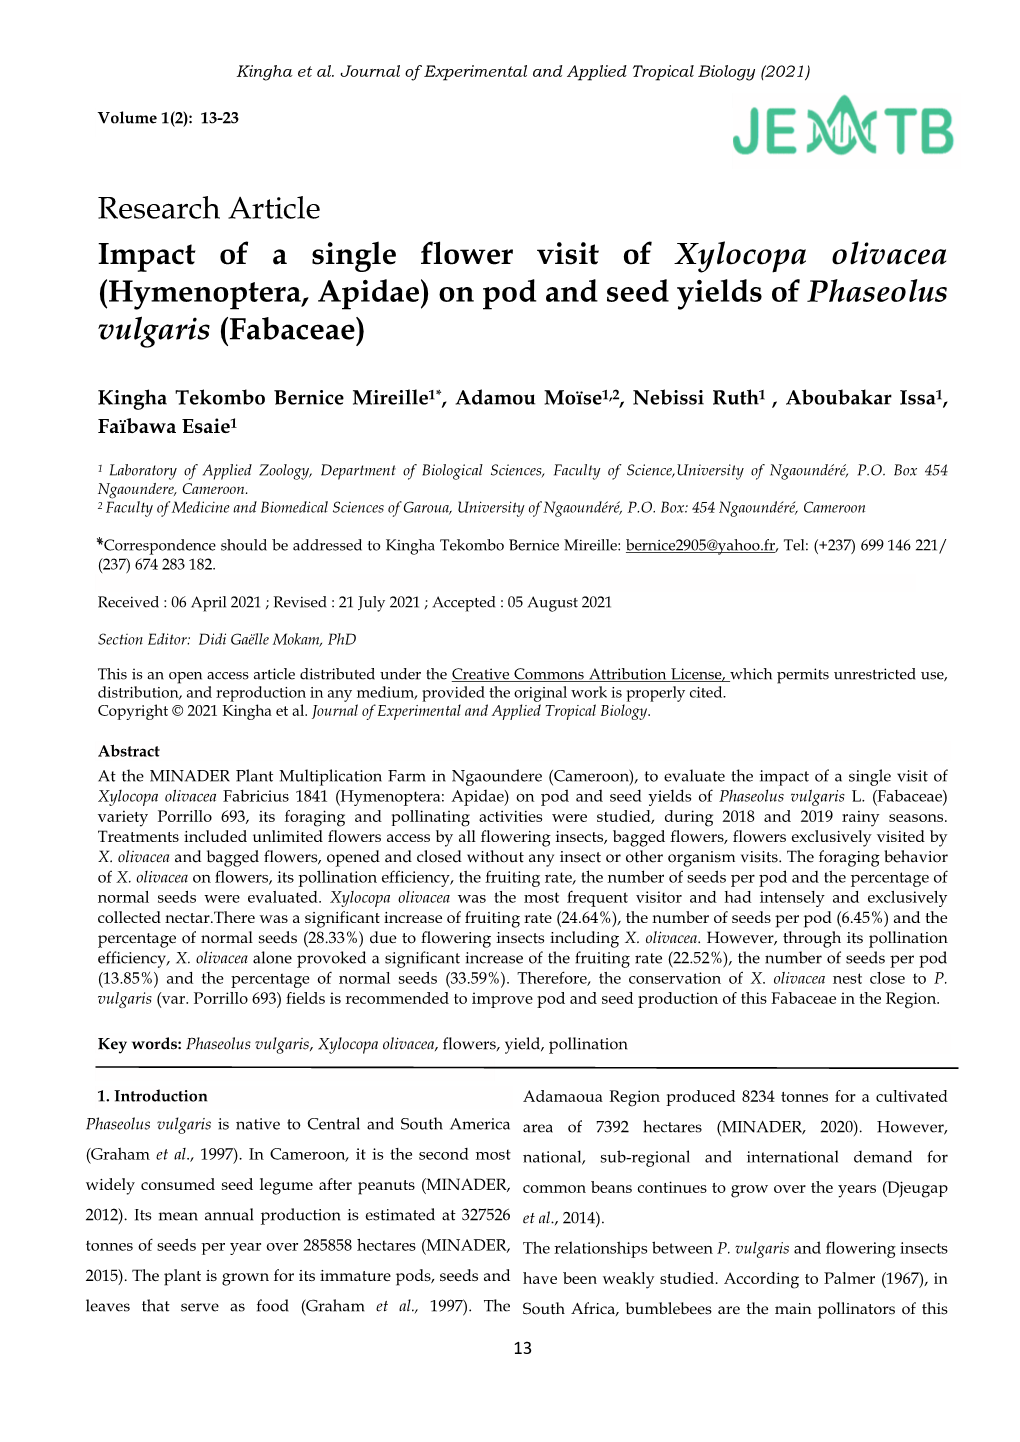 Research Article Impact of a Single Flower Visit of Xylocopa Olivacea